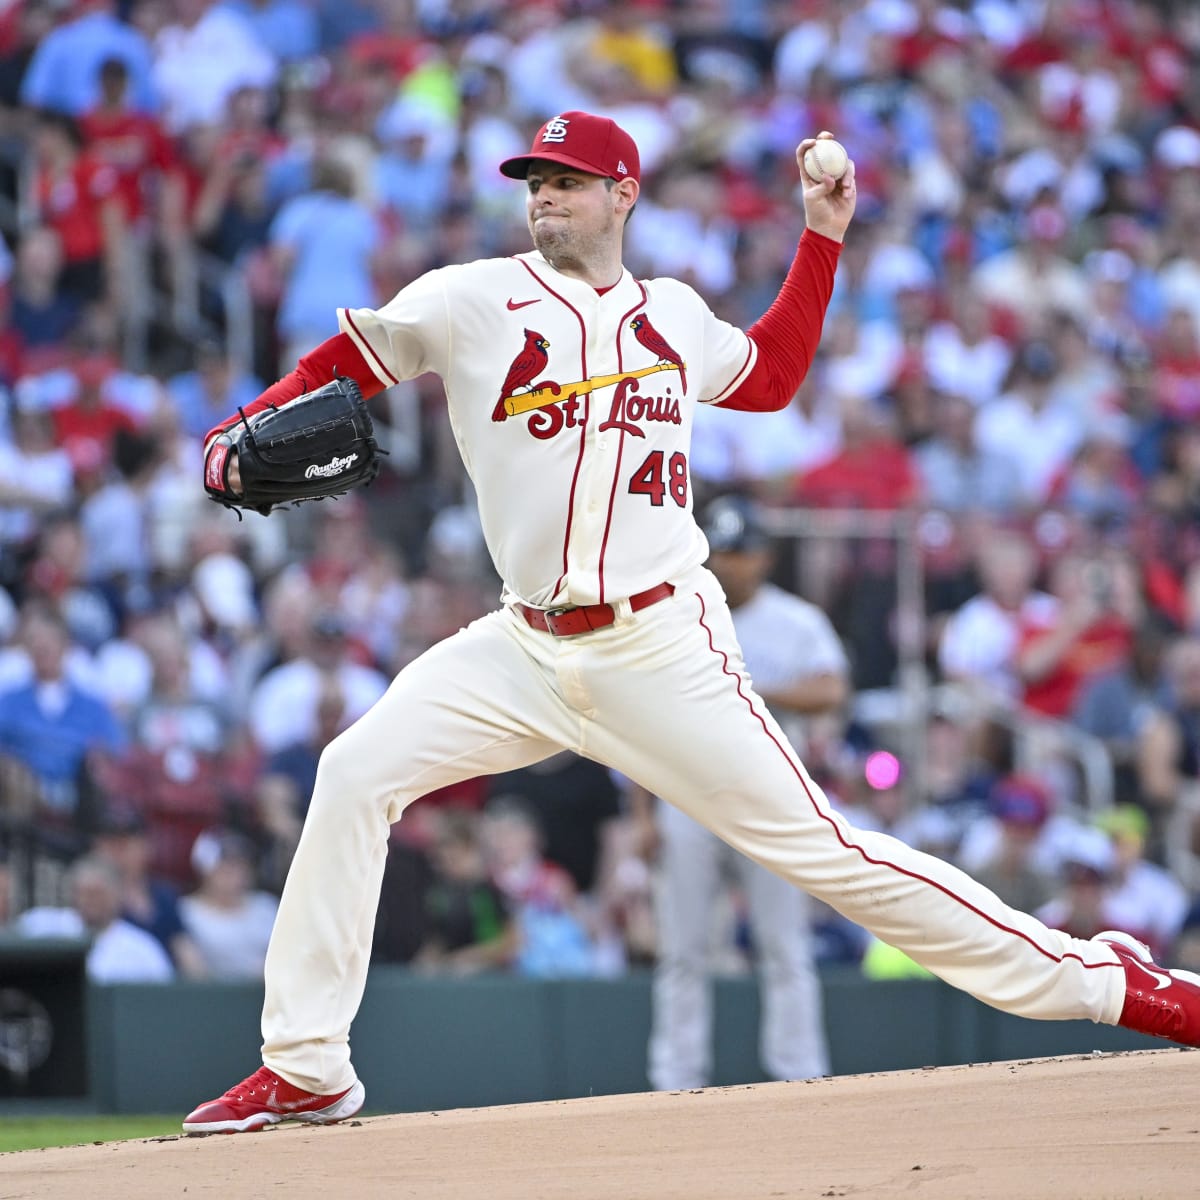 Jordan Montgomery has looked like an ace for the Cardinals